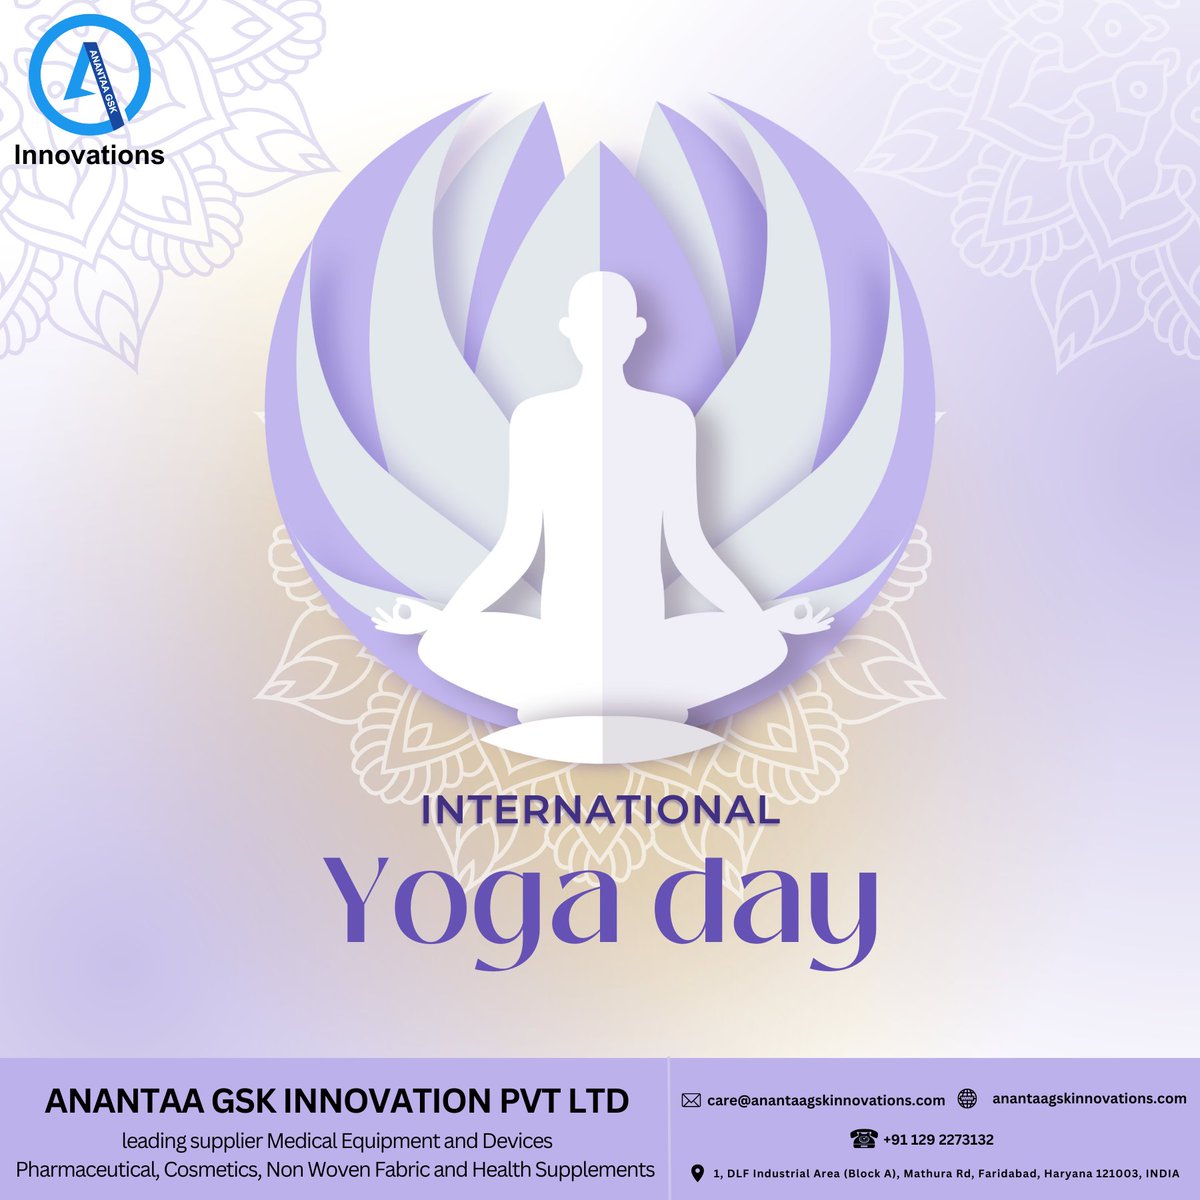 Let's unite with yoga to build a healthier new India and a happier world.
#anantaagskinnovations #yogaday #yoga #yogainspiration #yogapractice #yogalife #world #healthcare #health #safety #atwork #innovation #creativity #awareness #innovations #National #environmentfriendly